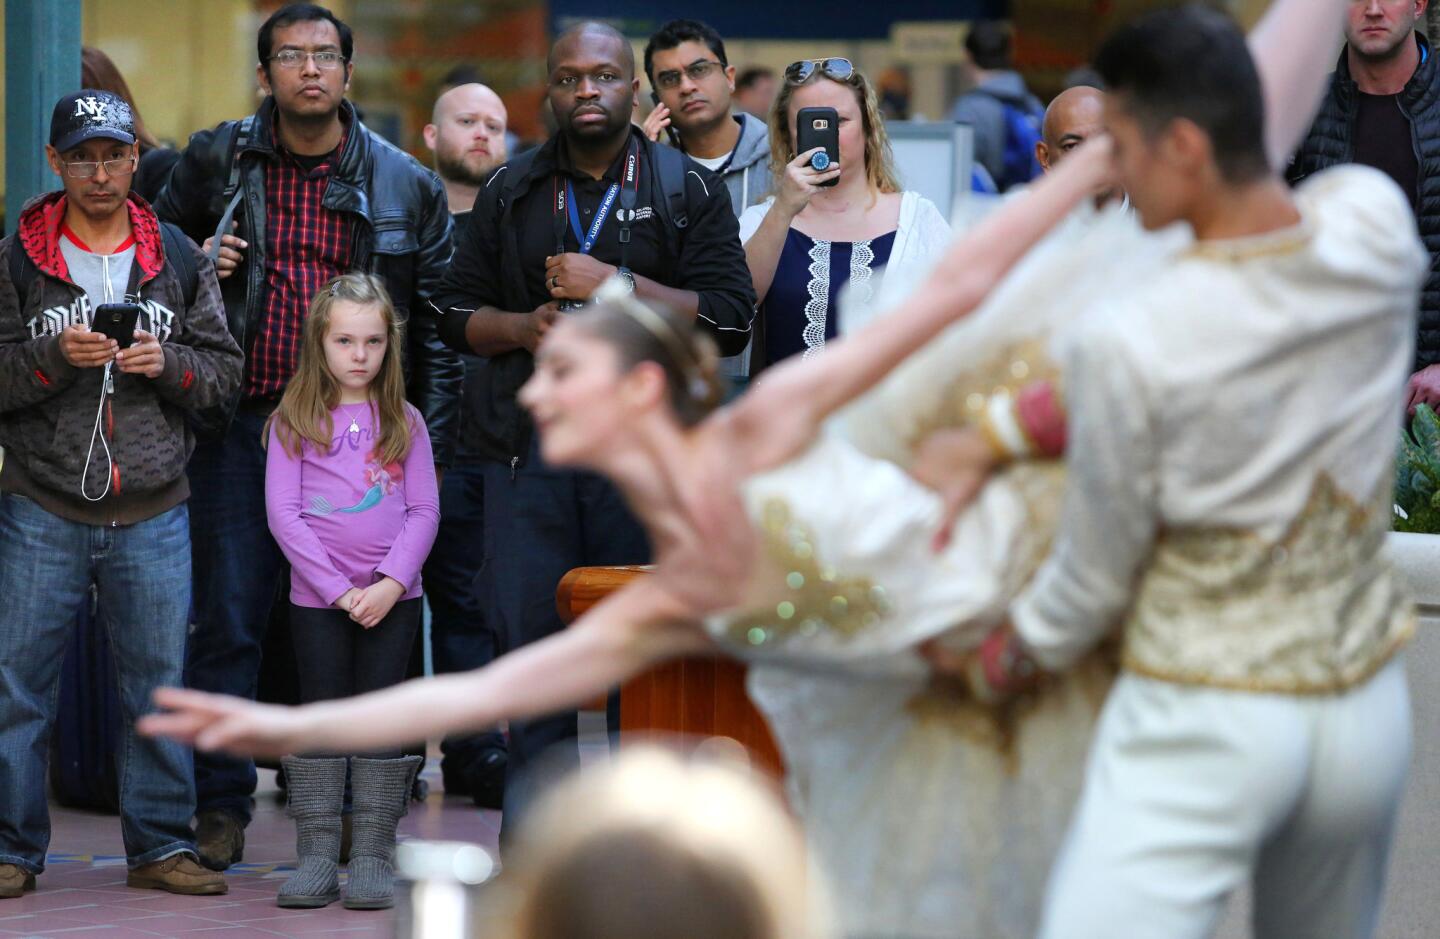 Travelers watch Israel Zavaleta and Cara Bell dance as members of the Orlando Ballet perform exerpts from The Nutcracker during a mini-performance in the Hyatt Hotel concourse at Orlando International Airport, Thursday, December 14, 2017. The ballet is one of the artistic endeavors that OIA brings in during the holidays to cheer up weary travelers. (Joe Burbank/Orlando Sentinel) 3030070